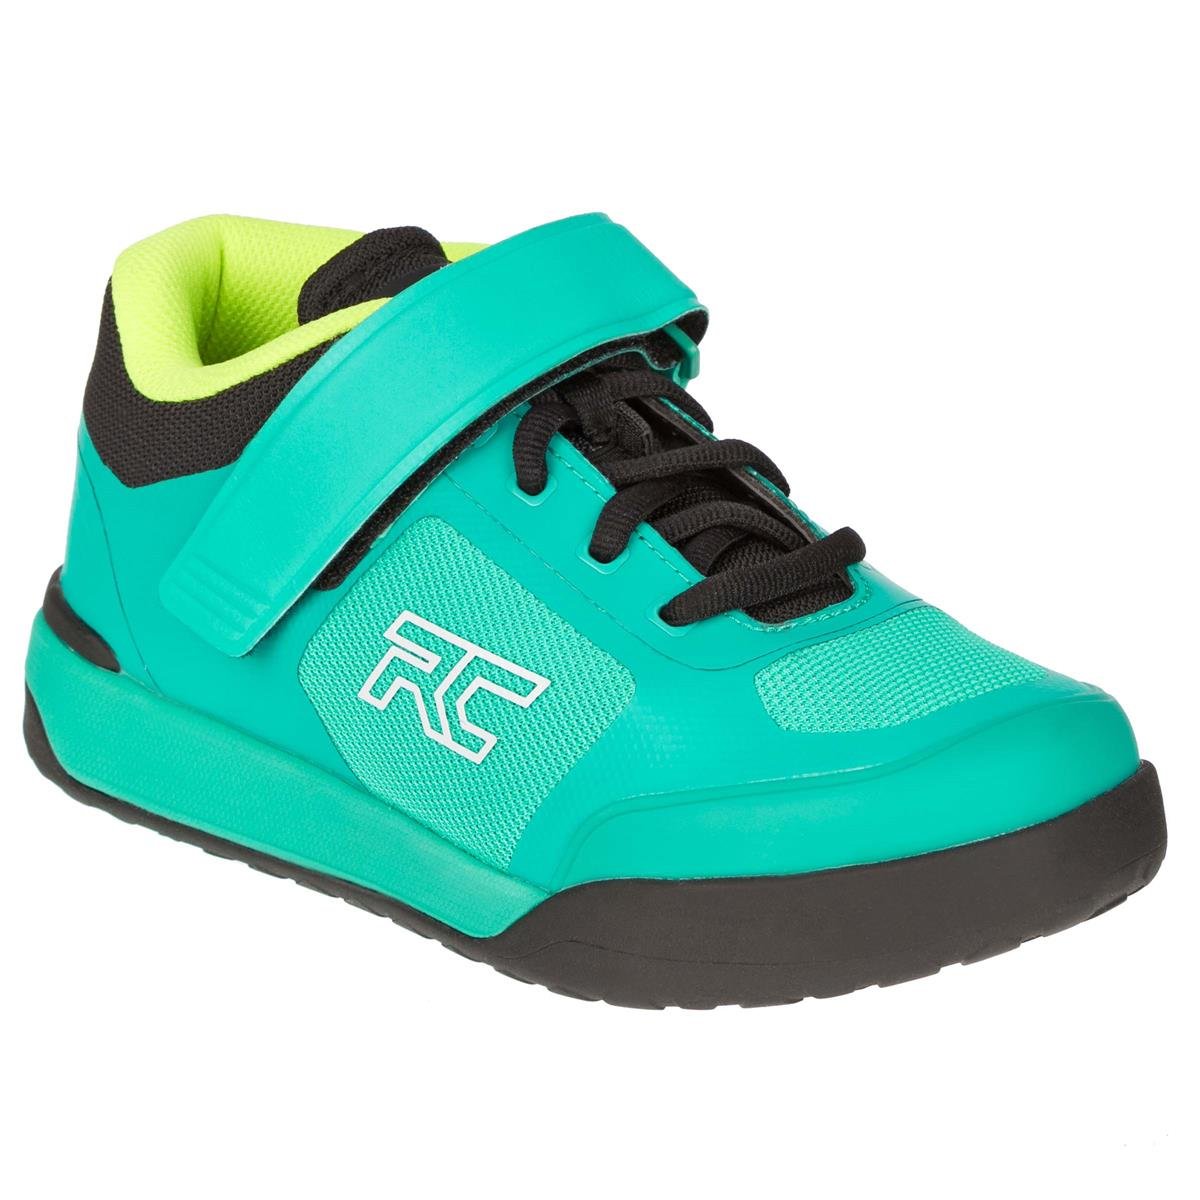 Ride Concepts Girls Bike Shoes Traverse Teal/Lime